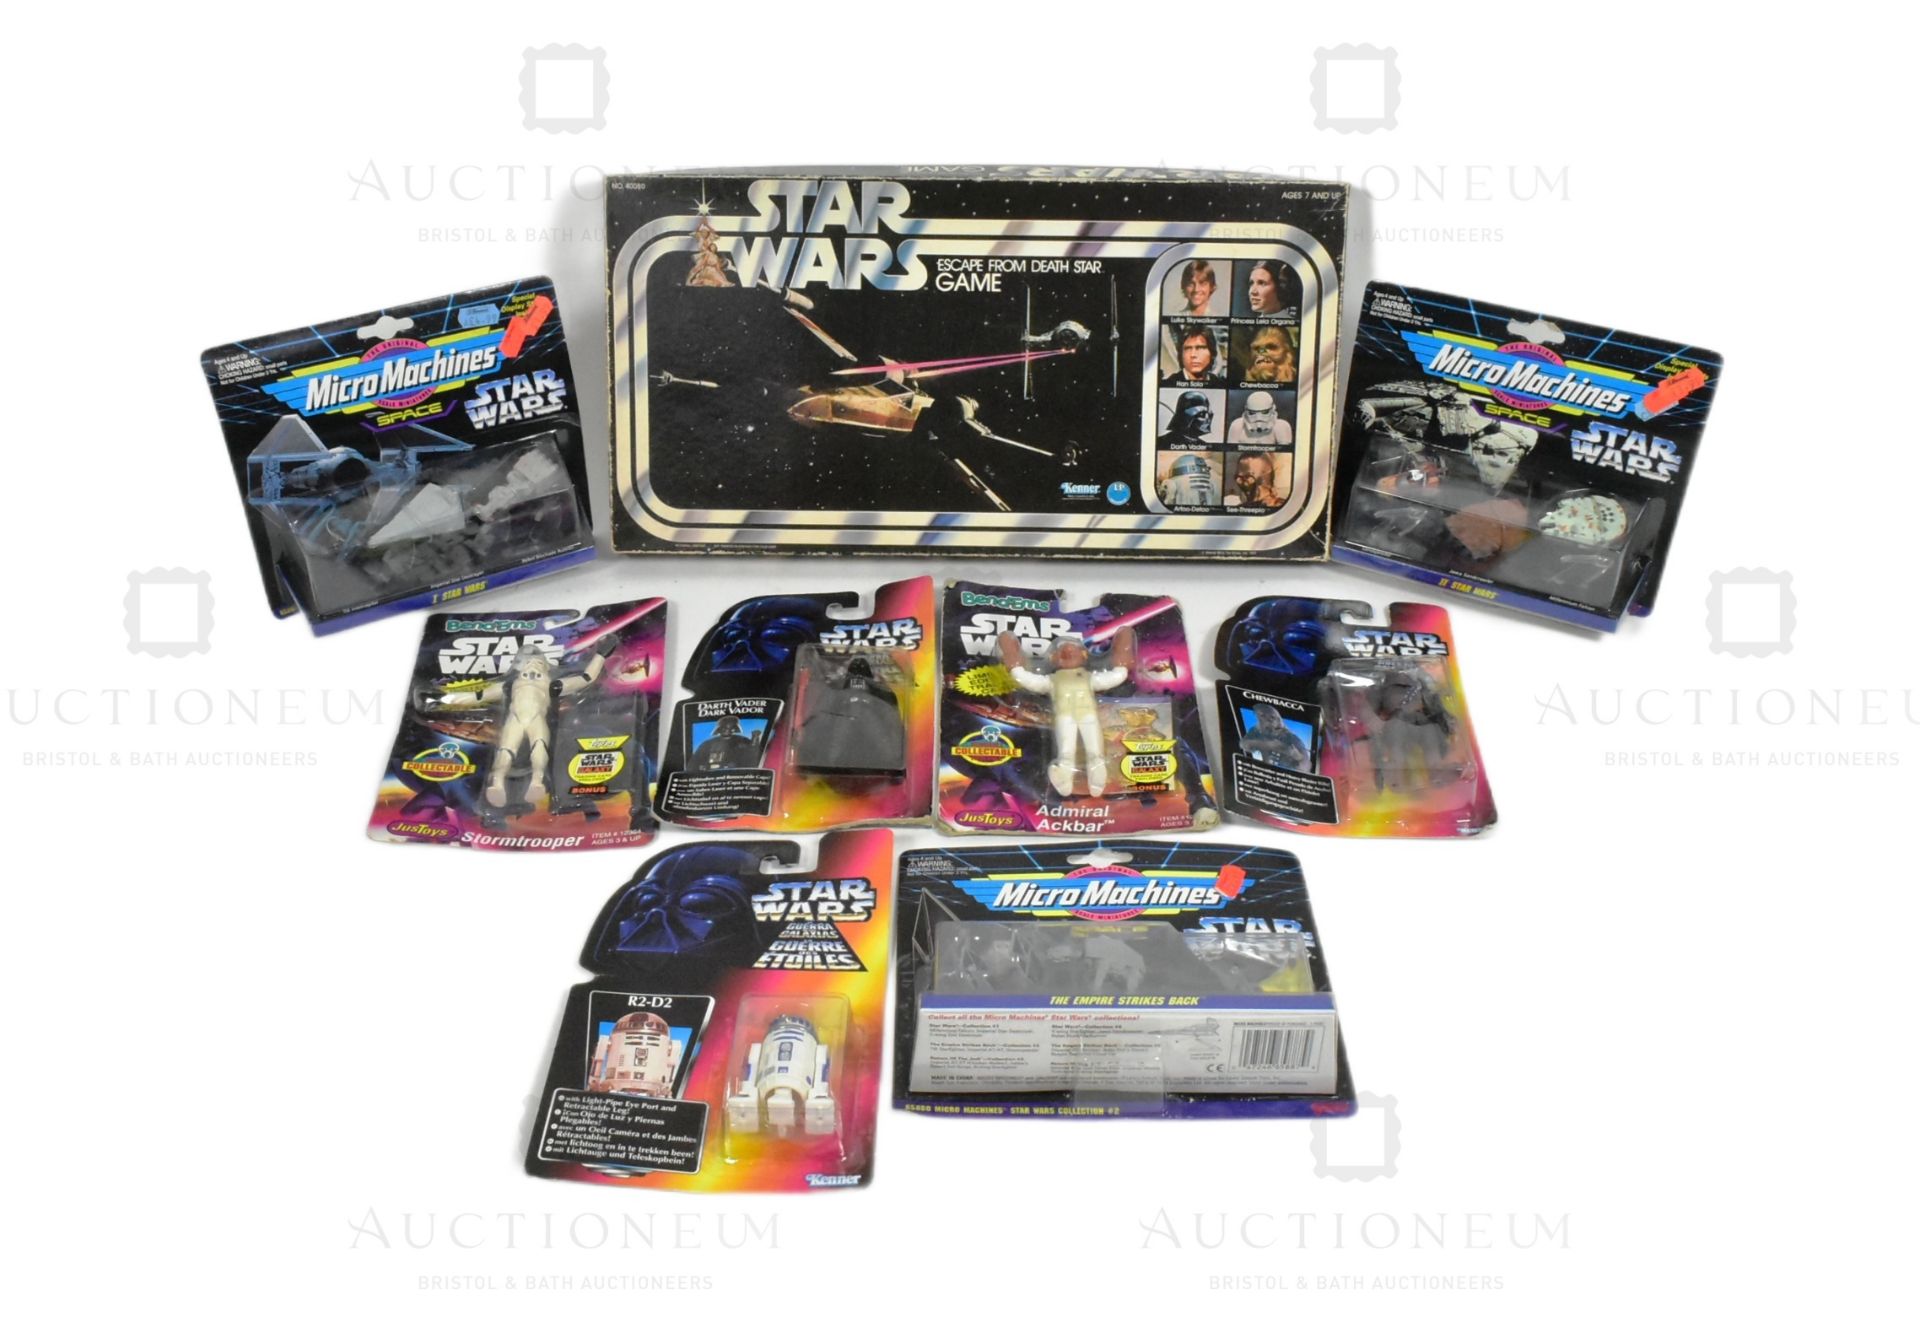 STAR WARS - COLLECTION OF ASSORTED TOYS & MERCHANDISE